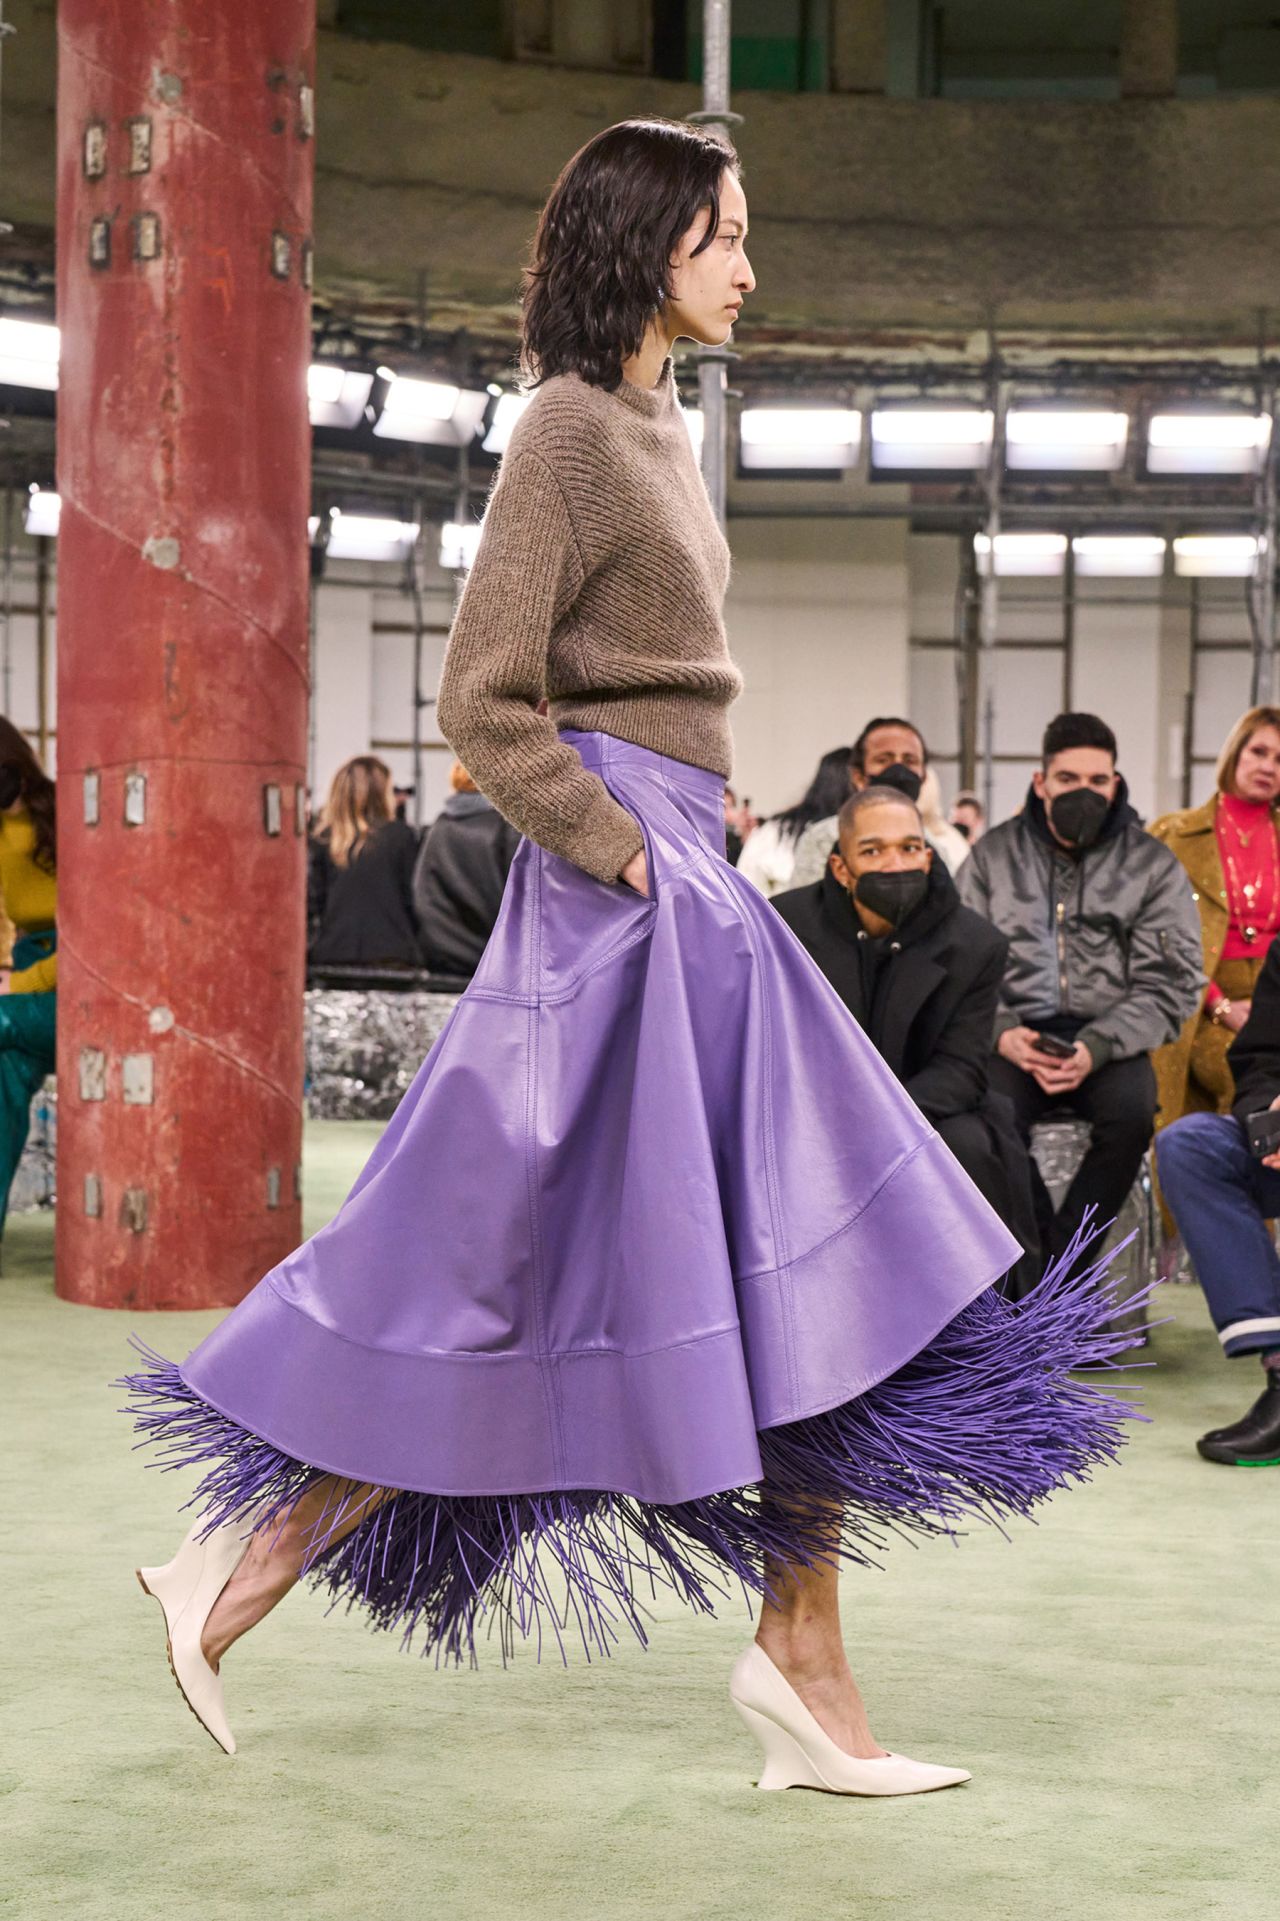 Leather round skirts in purple, butter yellow and bone white were layered with fringes. 